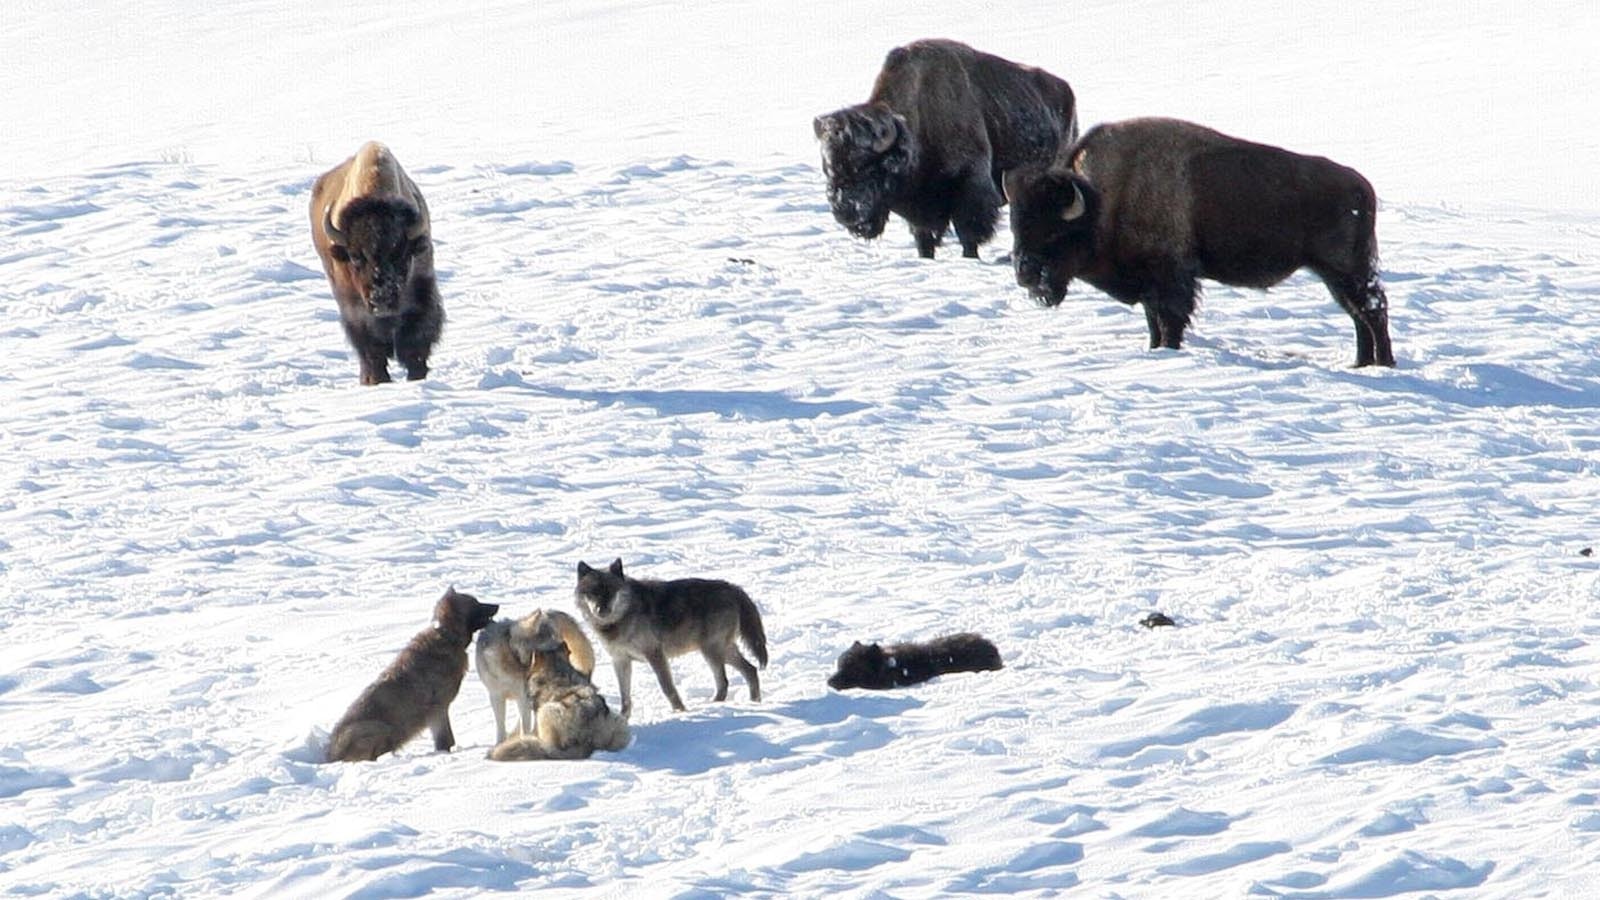 For wolves in Yellowstone National Park, hunting bison is often an extended waiting game.